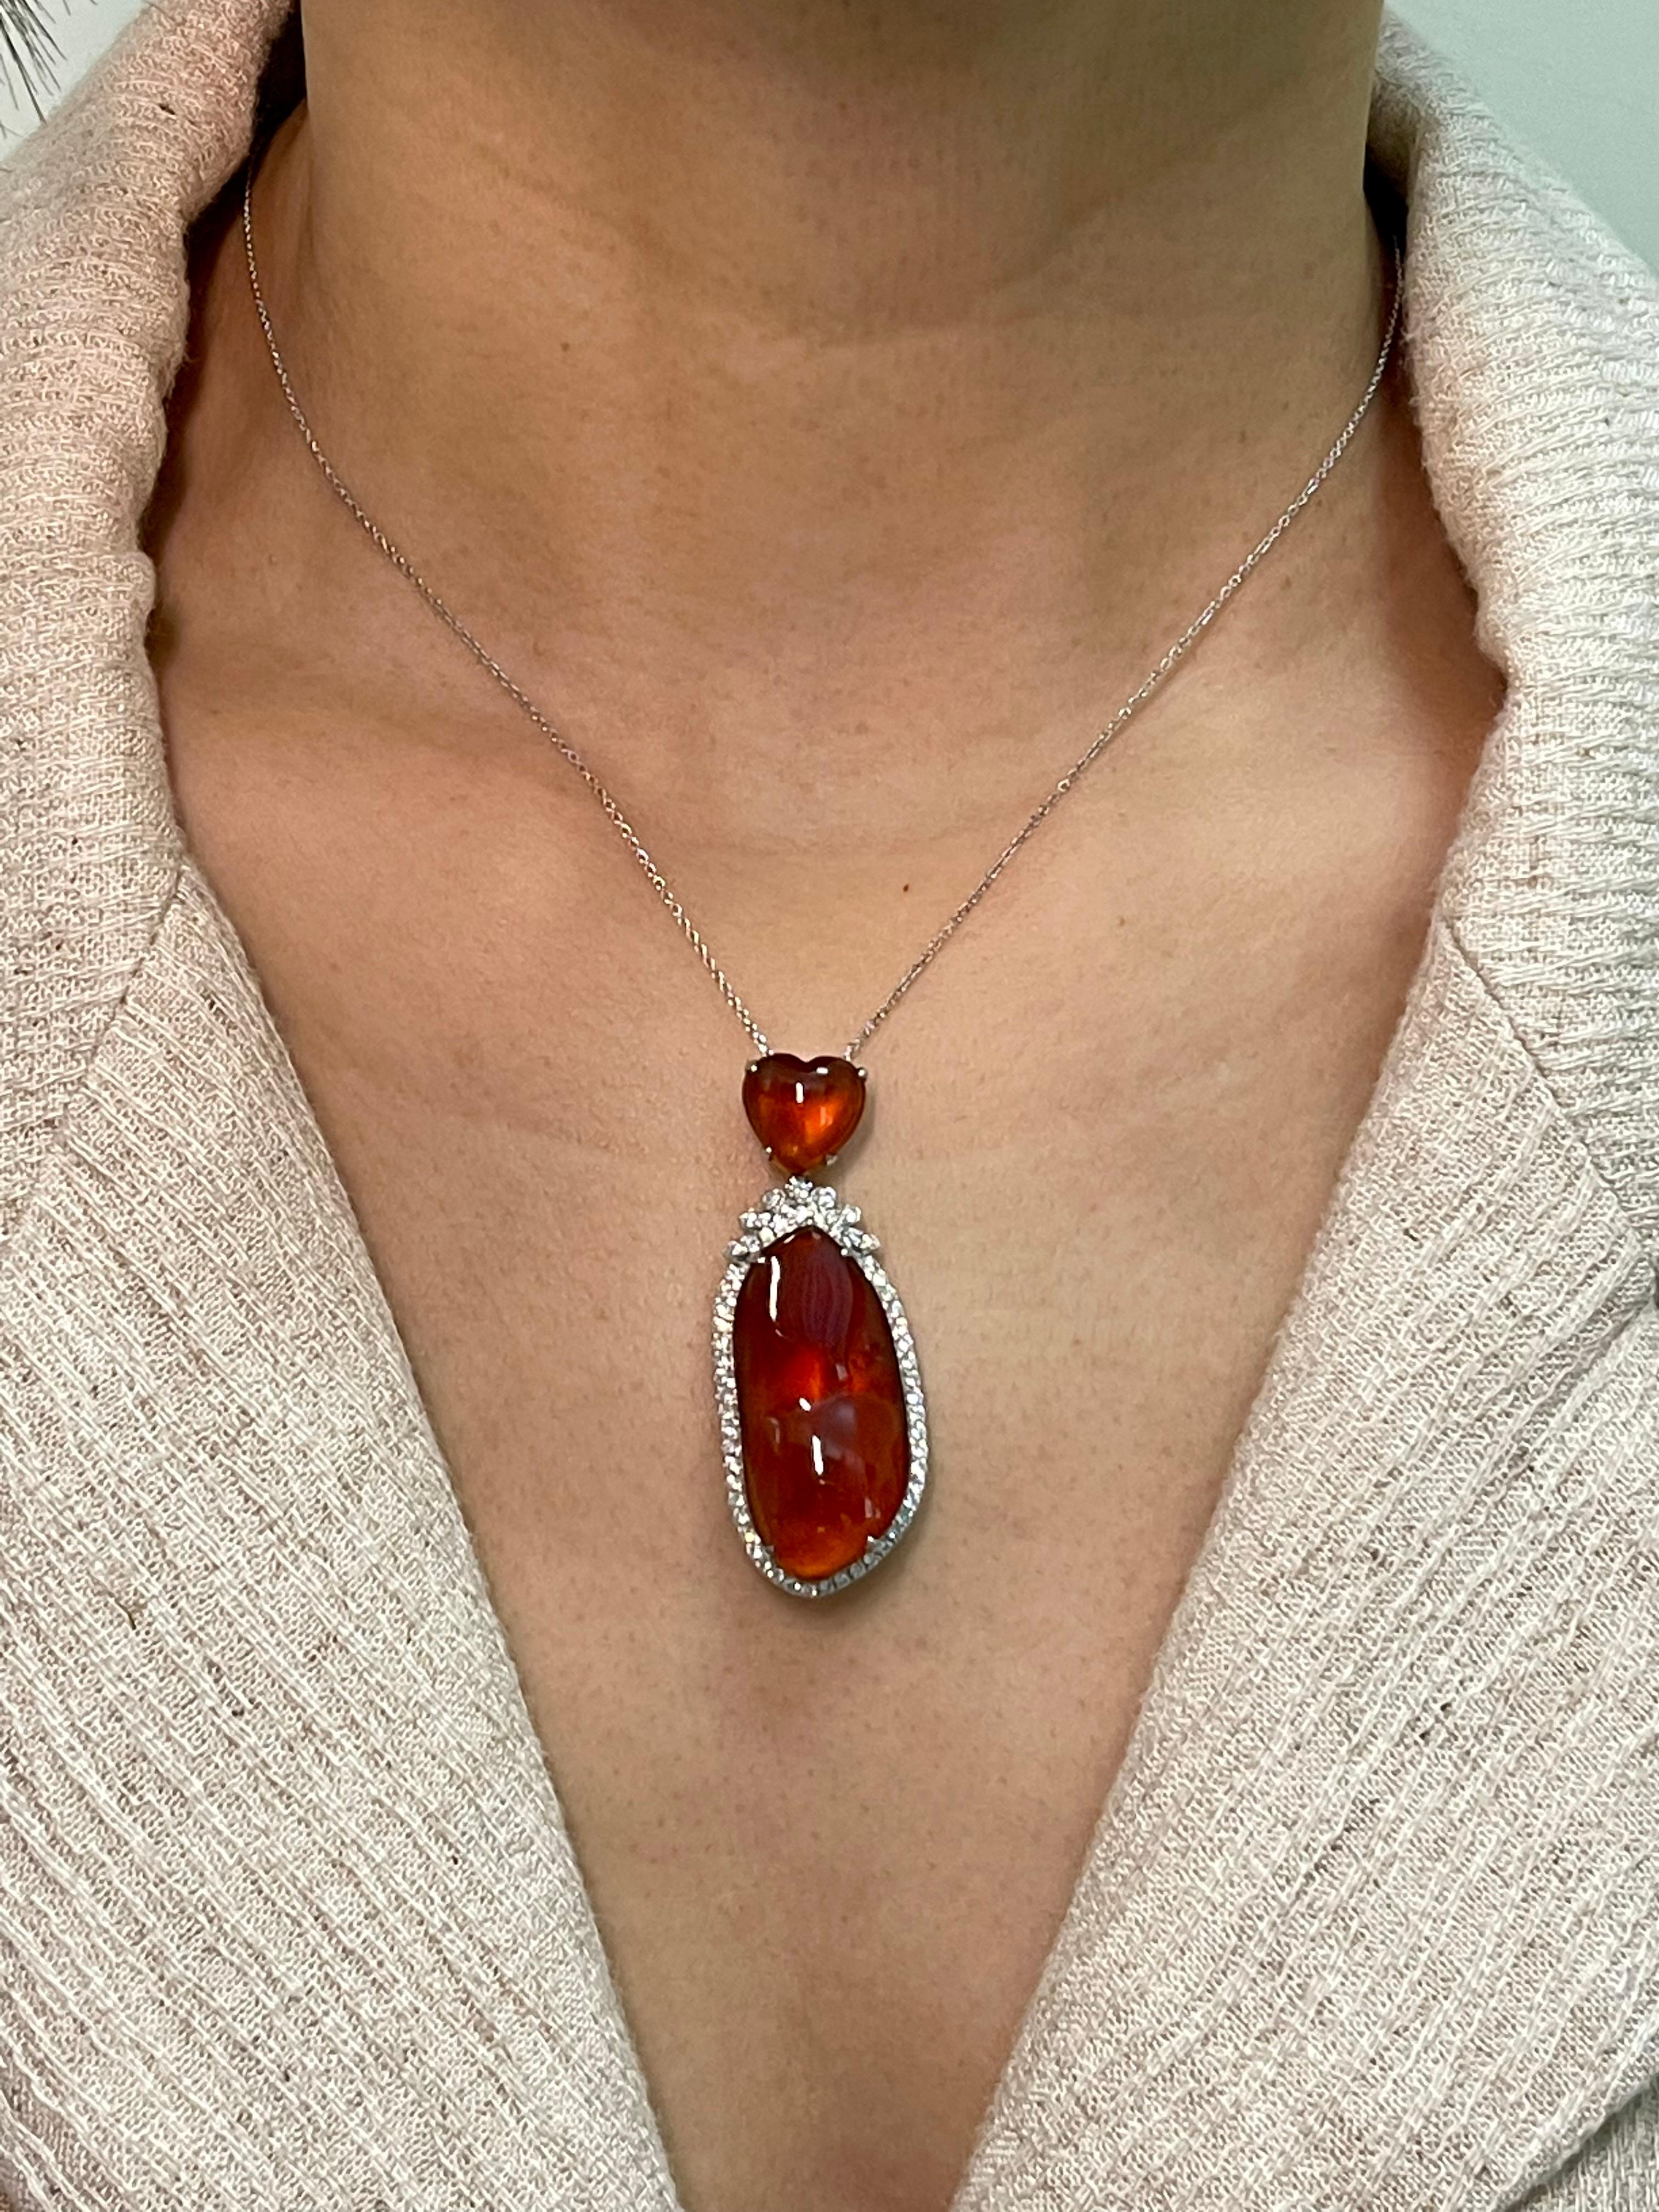 Please check out the HD video! This is a world class best. This pendant necklace has the best imperial red color, it GLOWS! In Jade collecting, imperial red jade is even more rare than imperial green jade! The material used to make this impressive